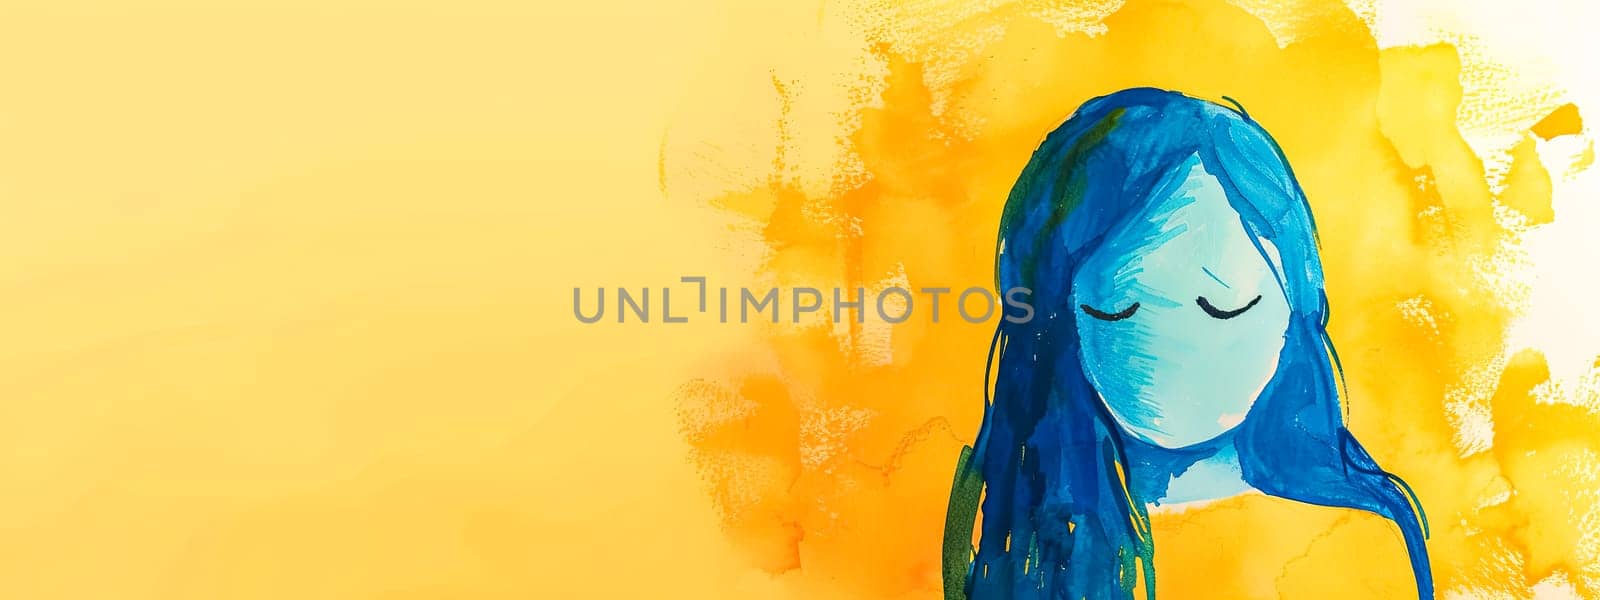 A visually striking painting featuring a woman with electric blue hair and closed eyes, set against a vibrant yellow background.